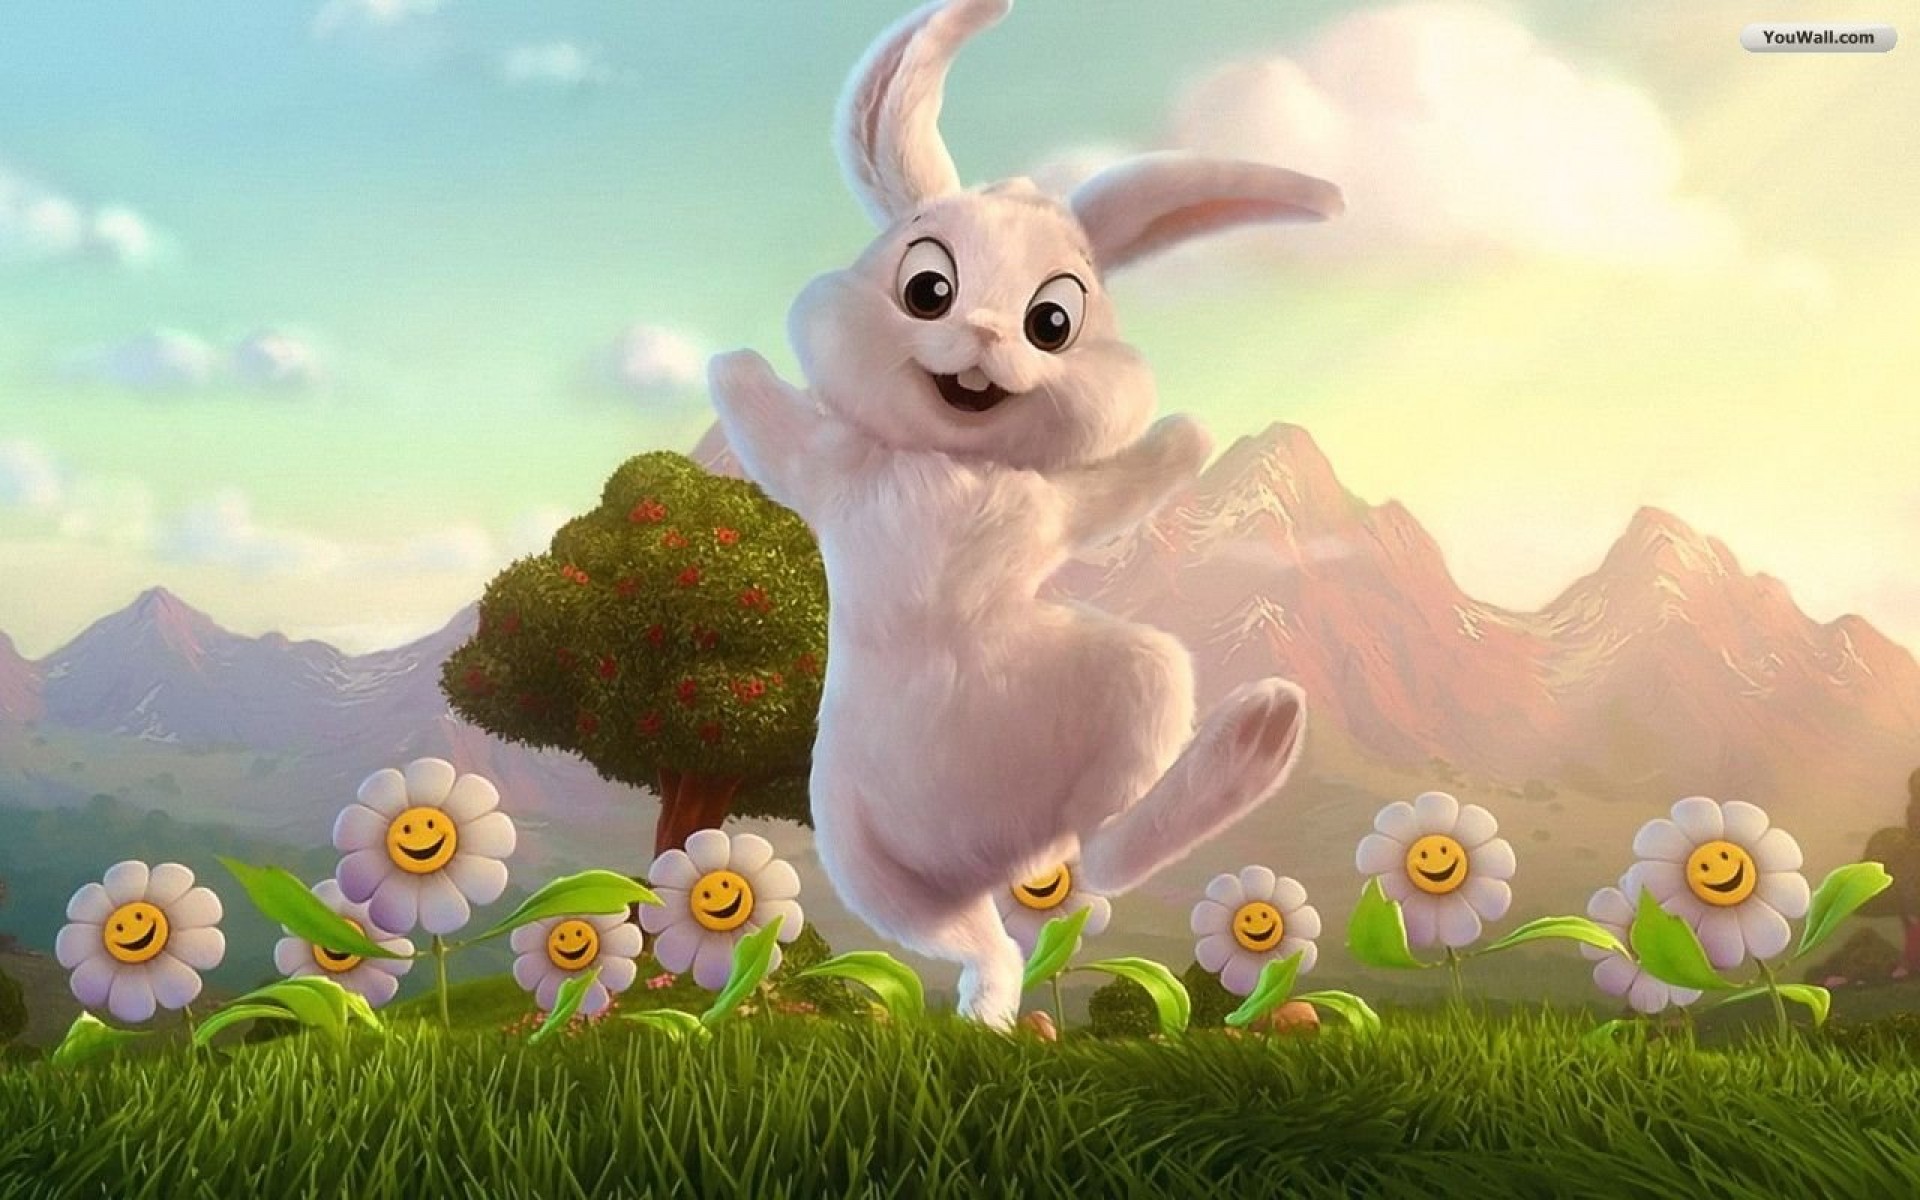 Easter Bunny Photo's That You'll Never Forget! - LDS S.M.I.L.E.